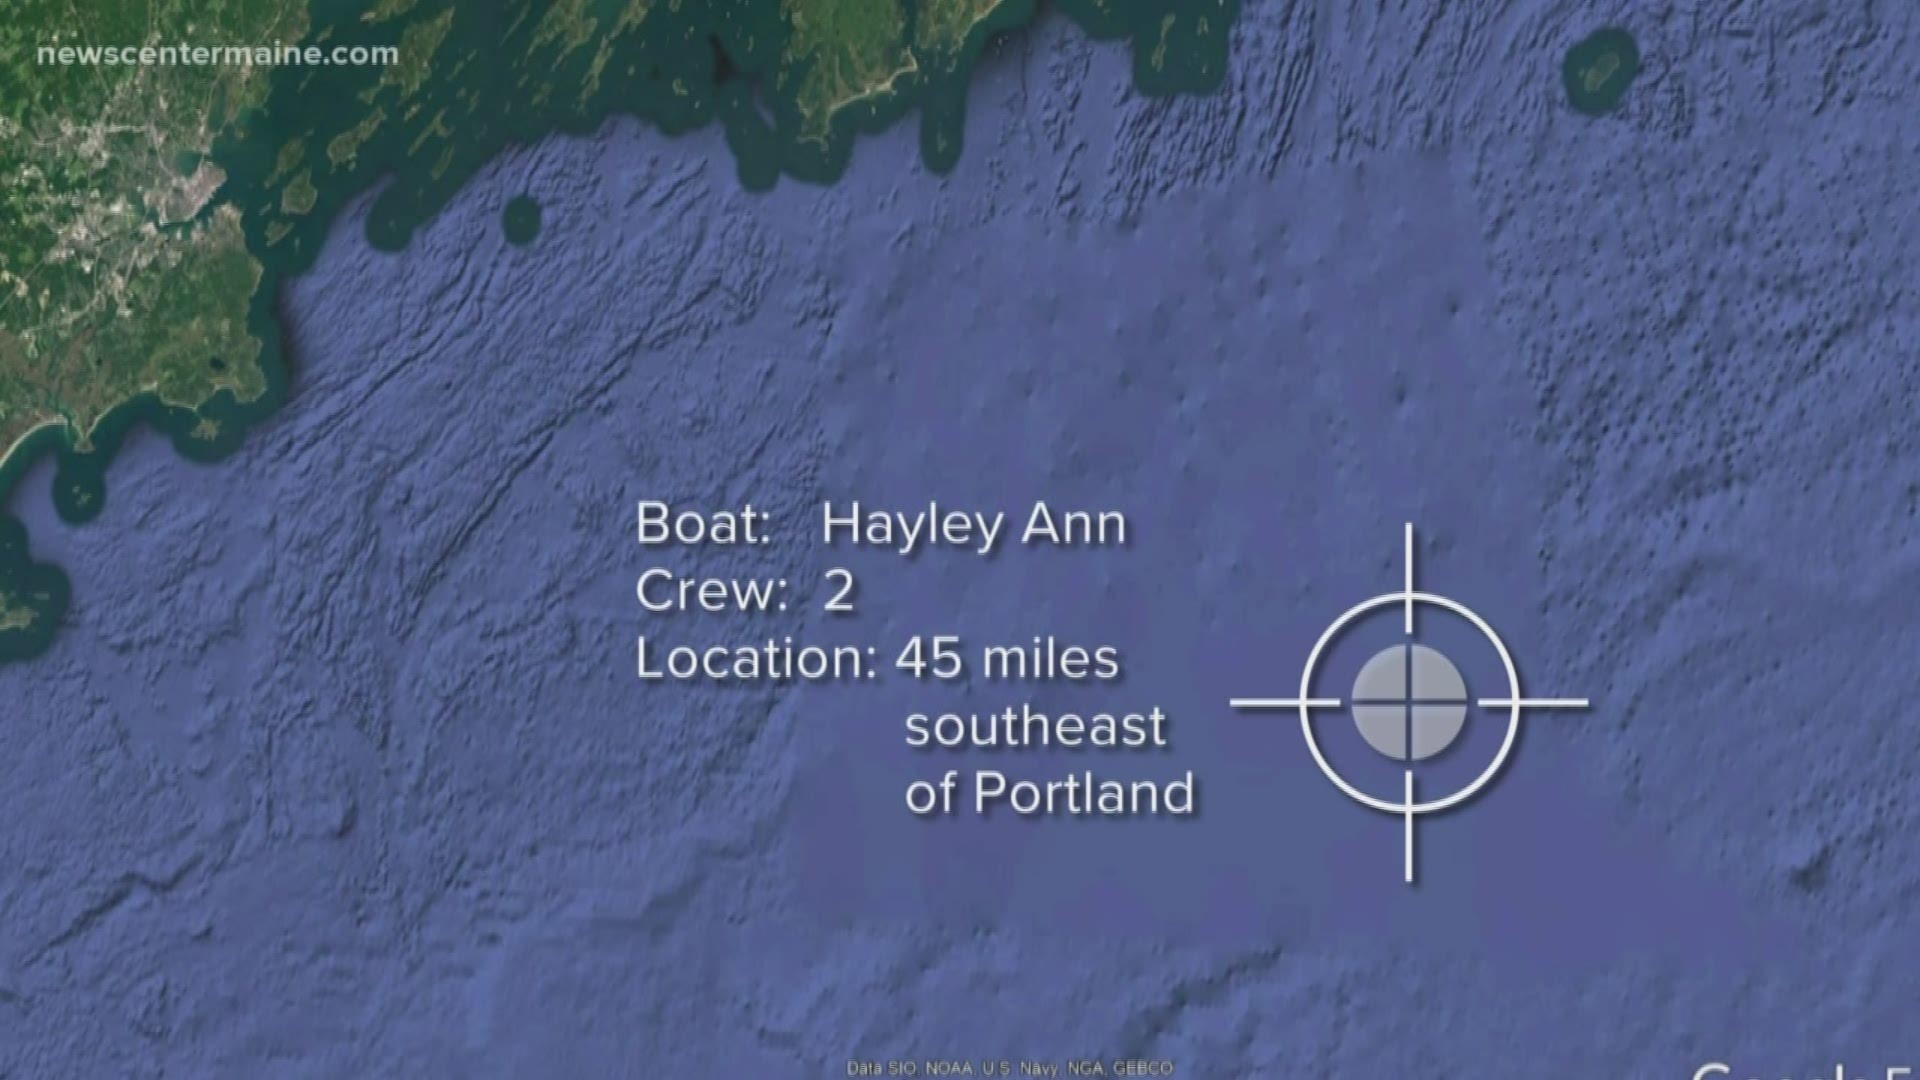 The crew members of the Hayley Ann were found dead after their boat sank off the coast of Portland.